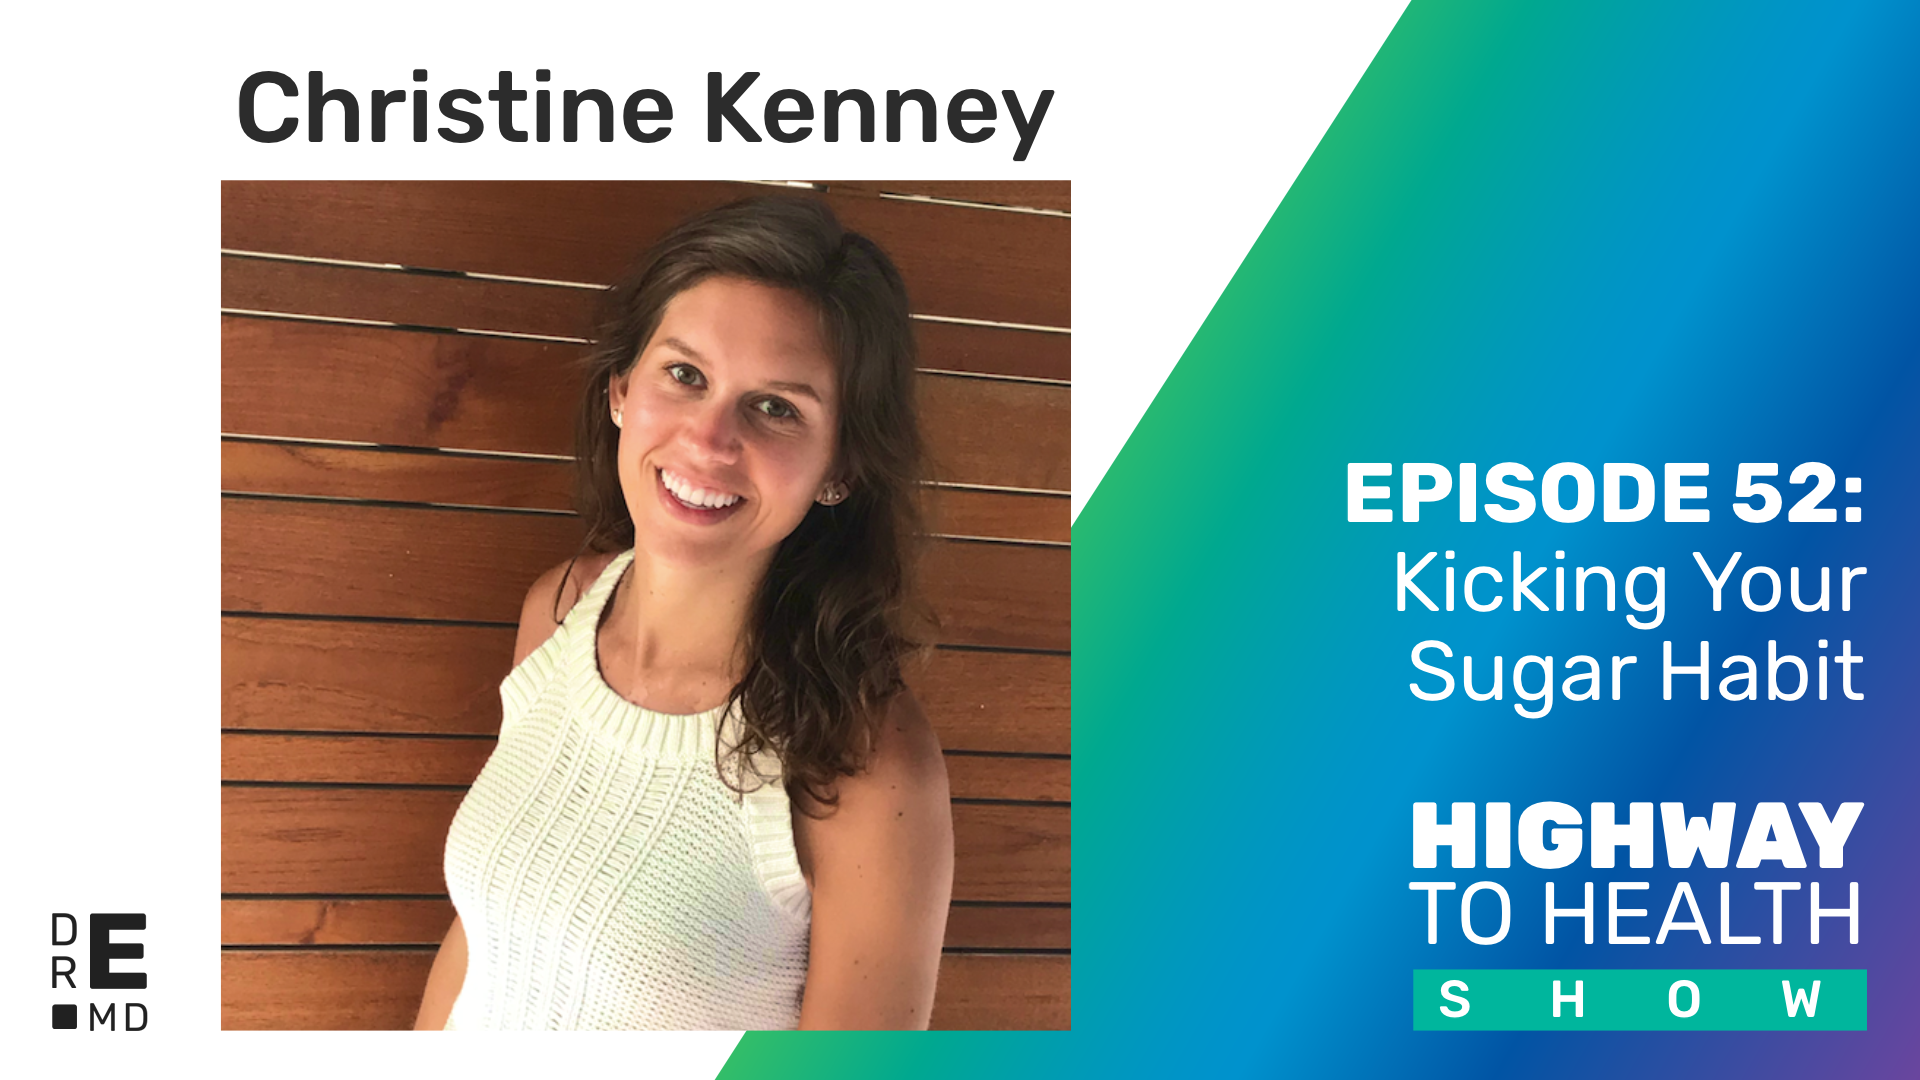 Highway to Health: Ep 52 - Christine Kenney